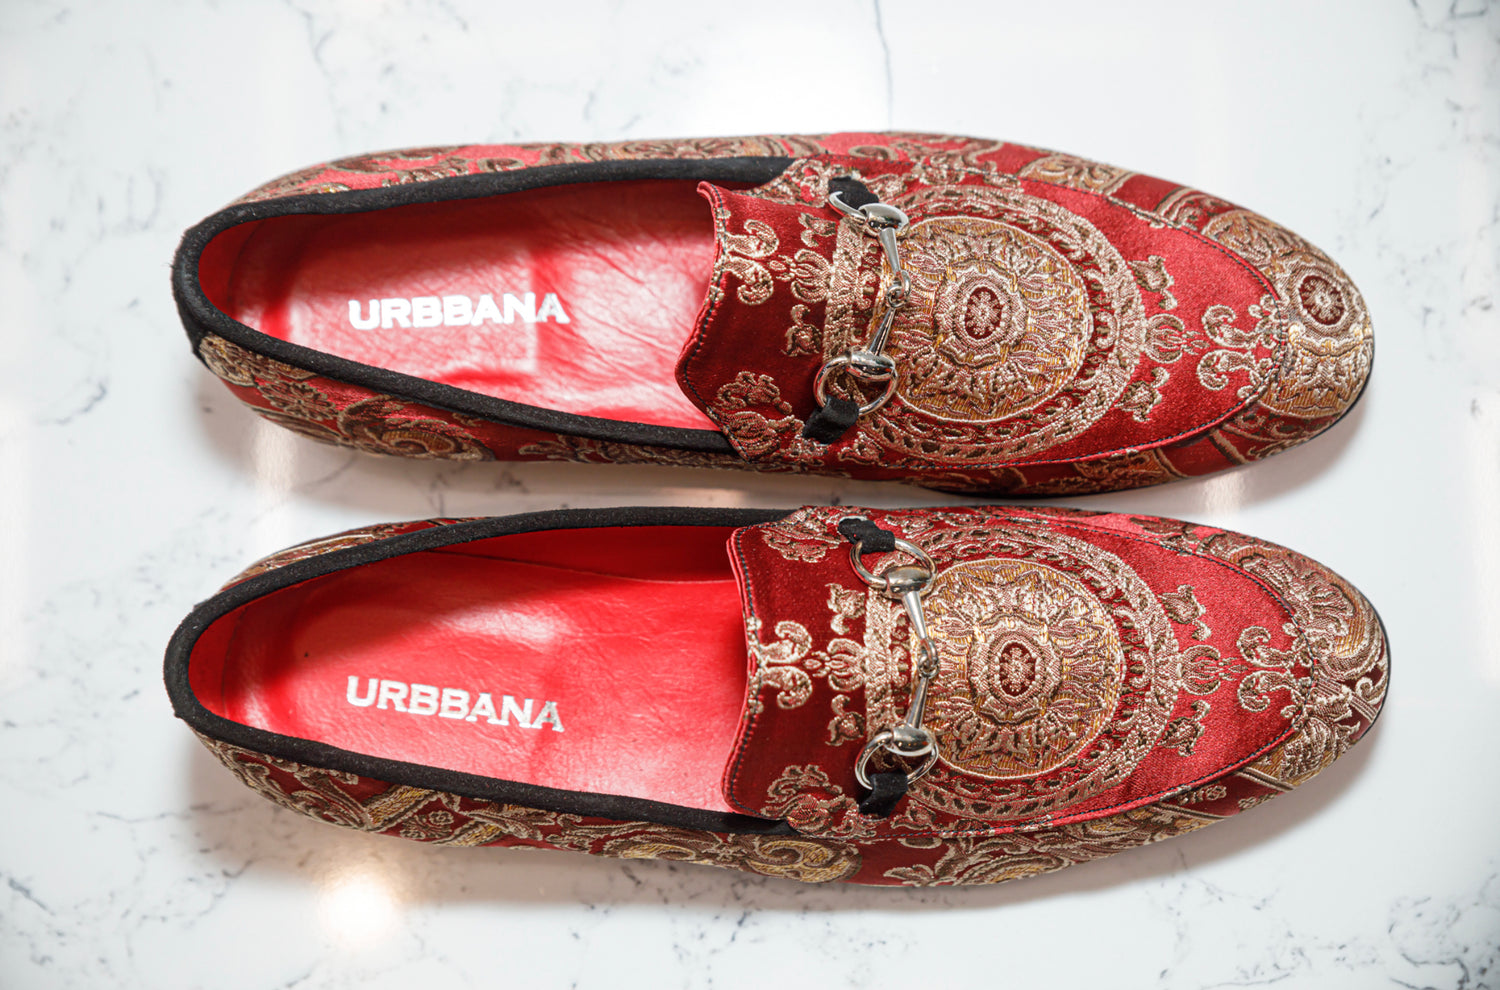 The Baroque Loafers - Red